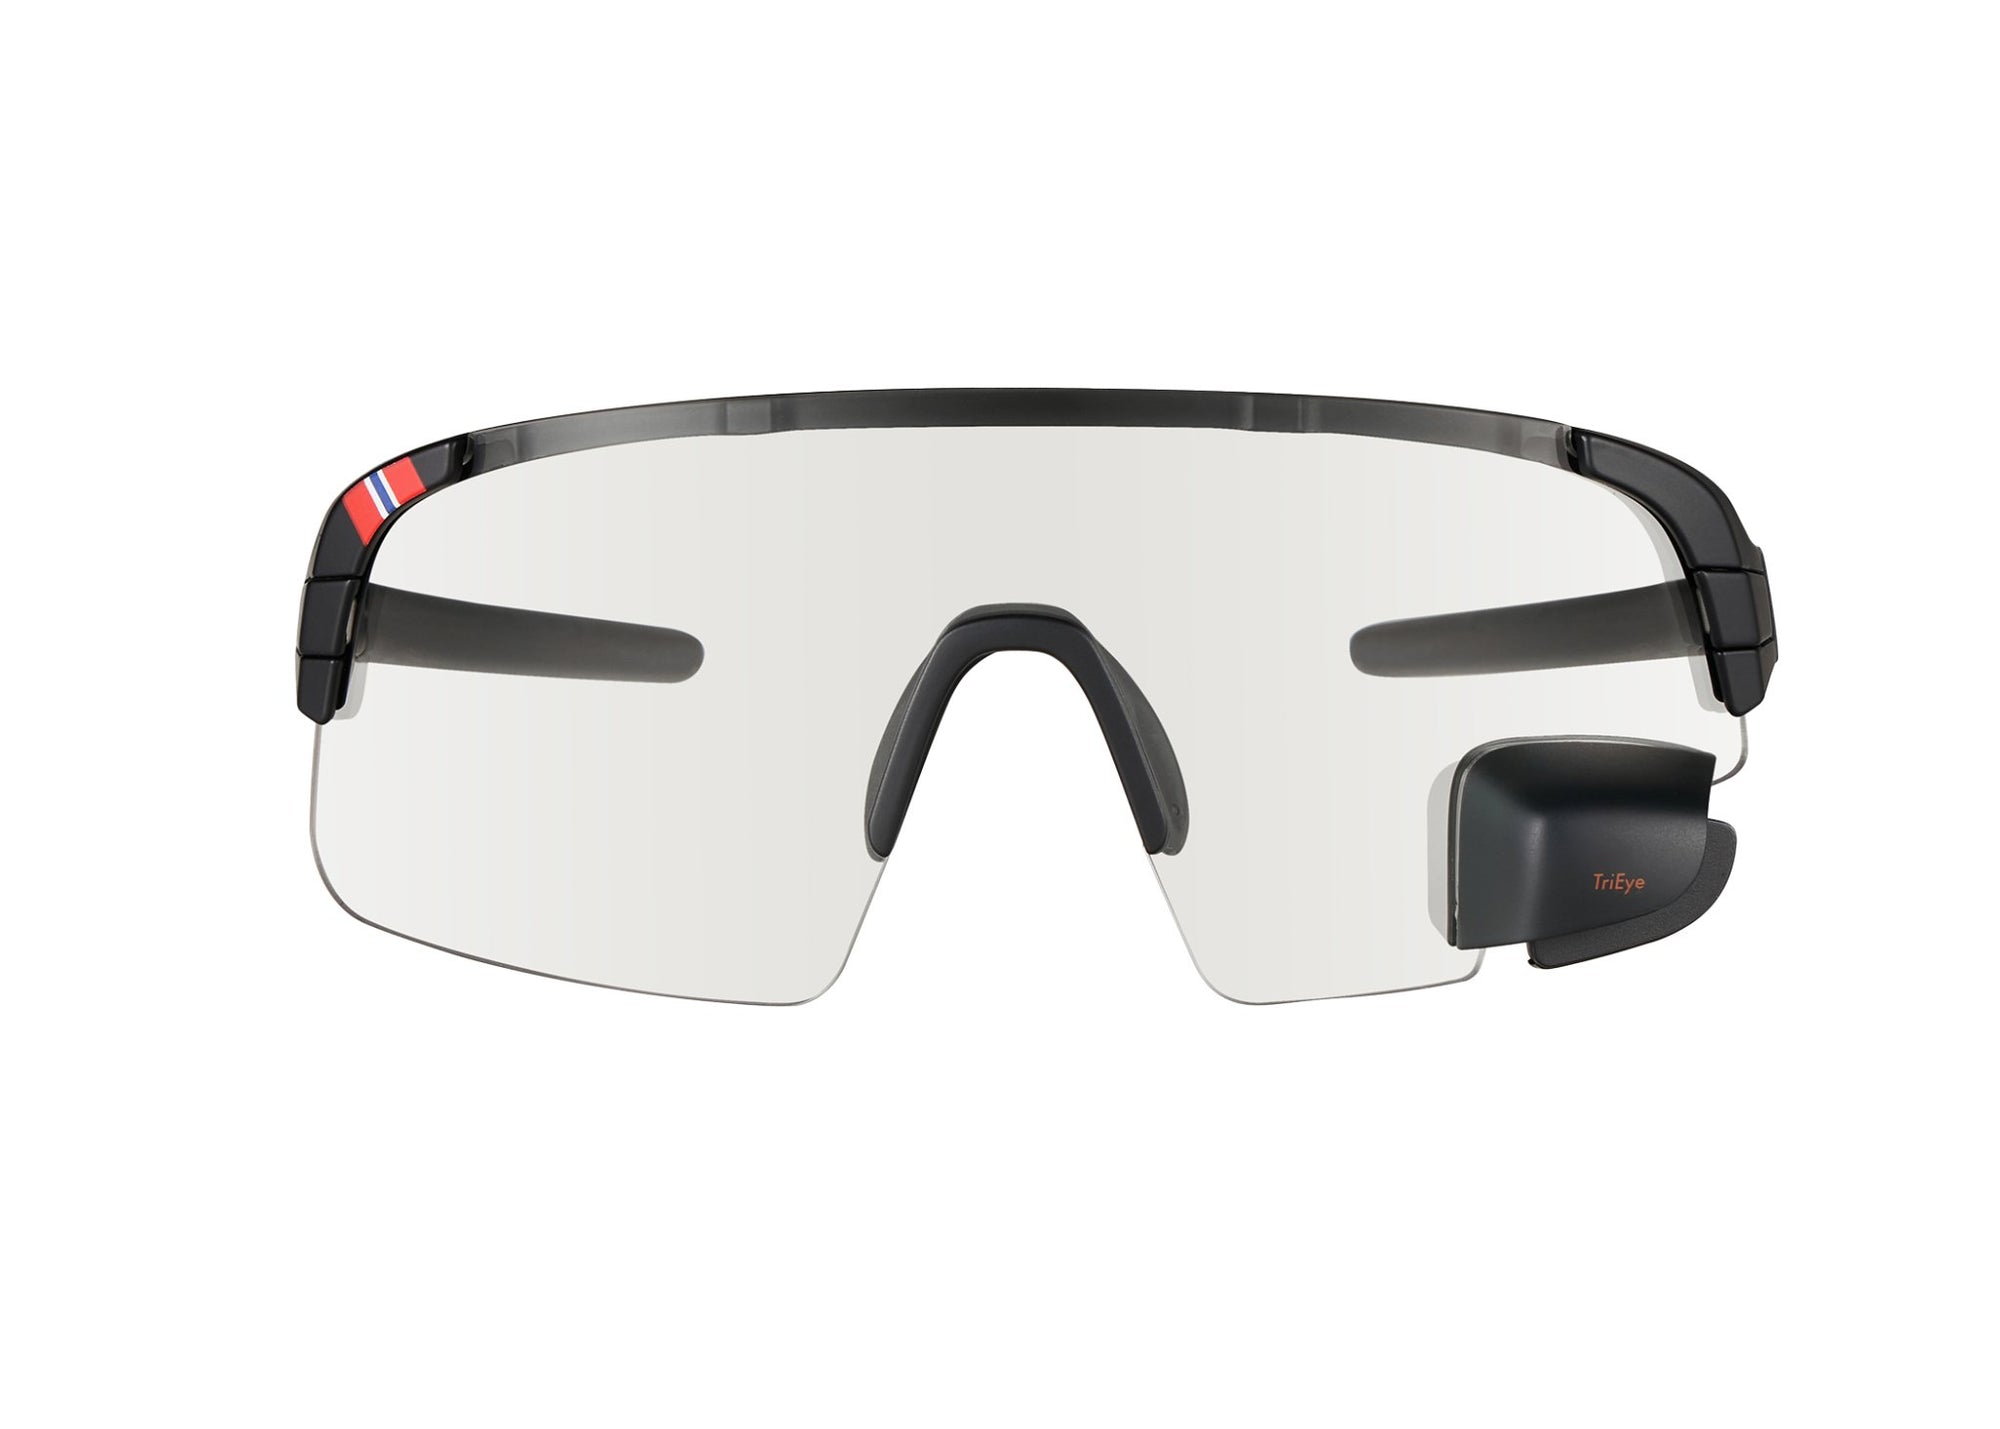 TriEye - View Sport Photochromatic - Cycling Glasses with Mirror - 7090048760458